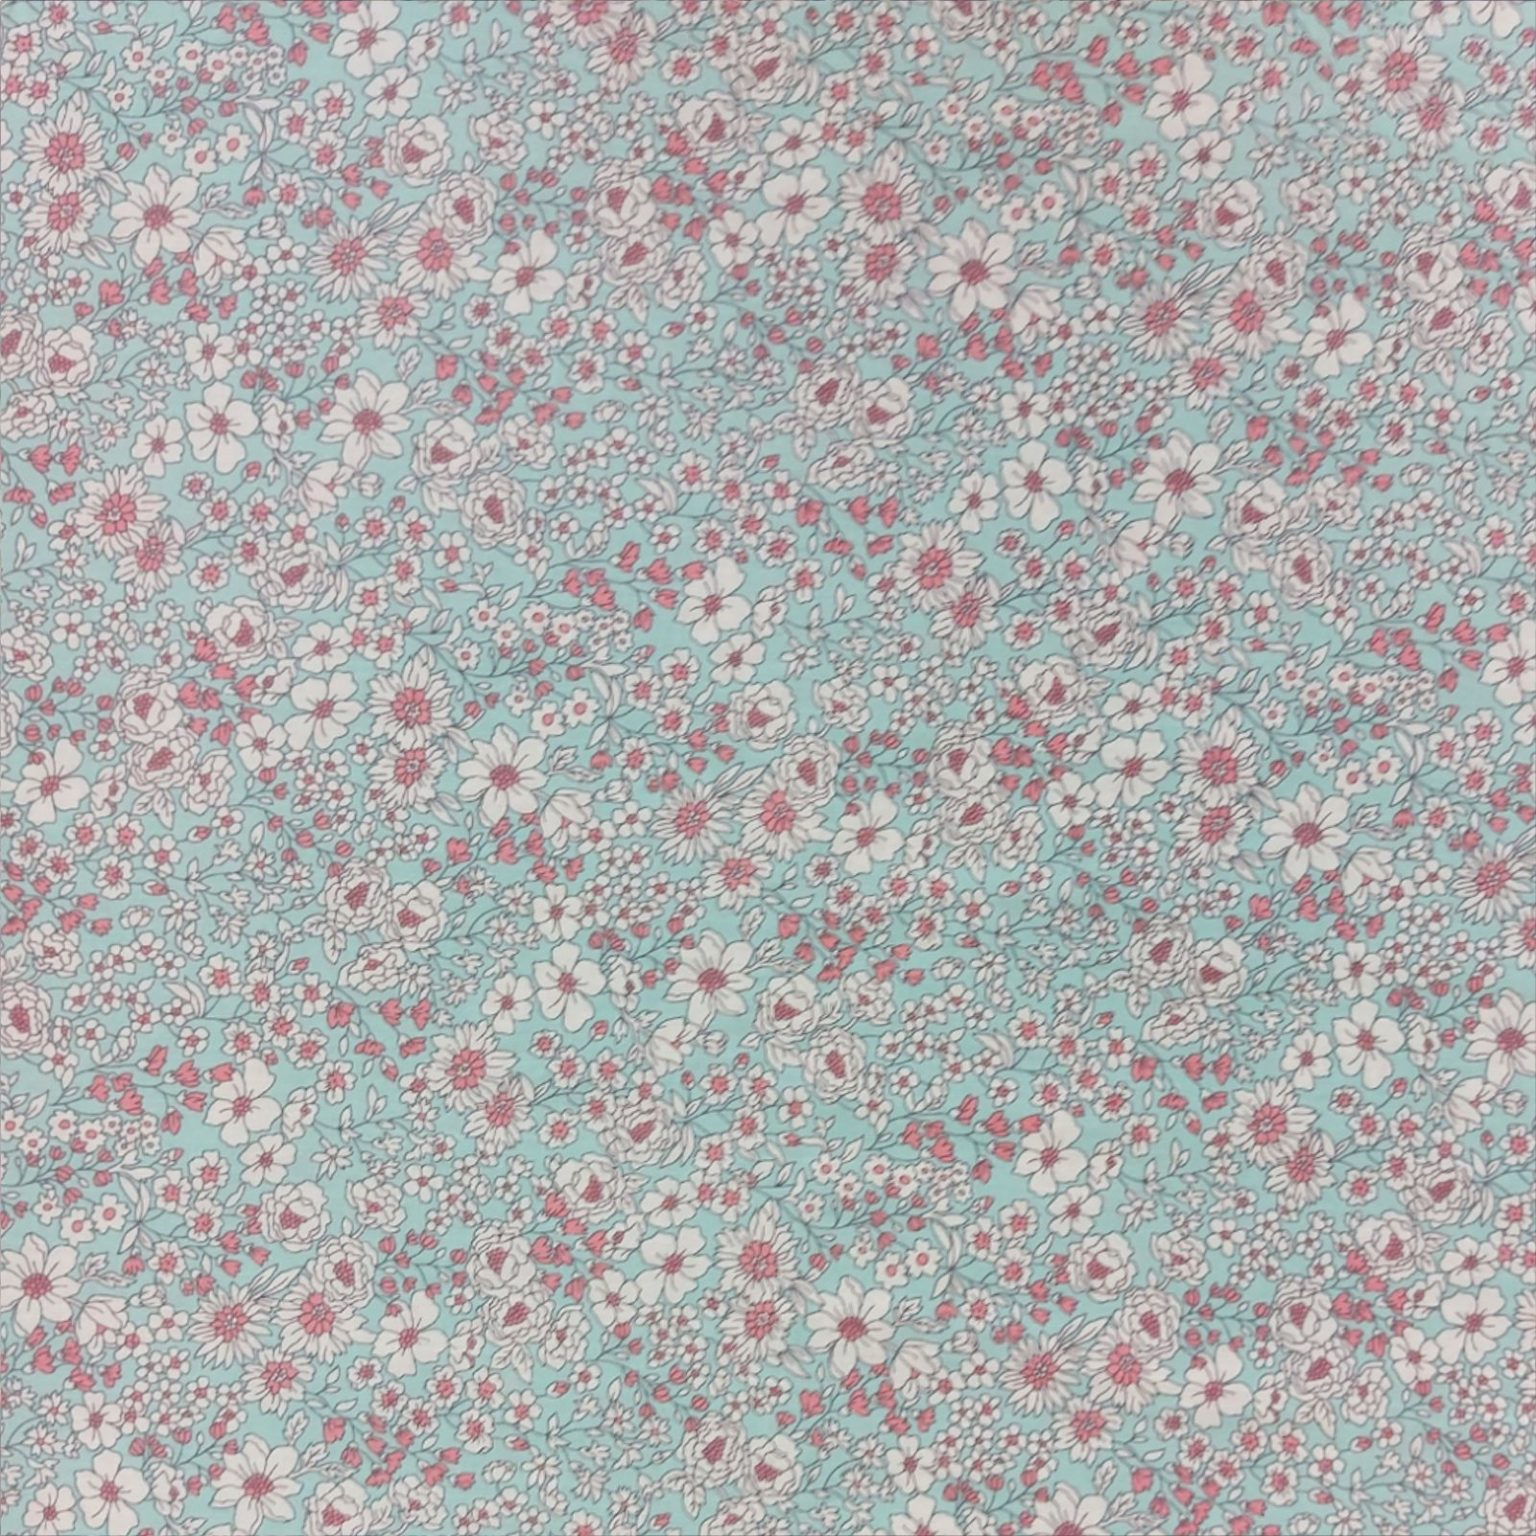 Dressmaking Fabric | Floral on Mint Pima Cotton Lawn | More Sewing